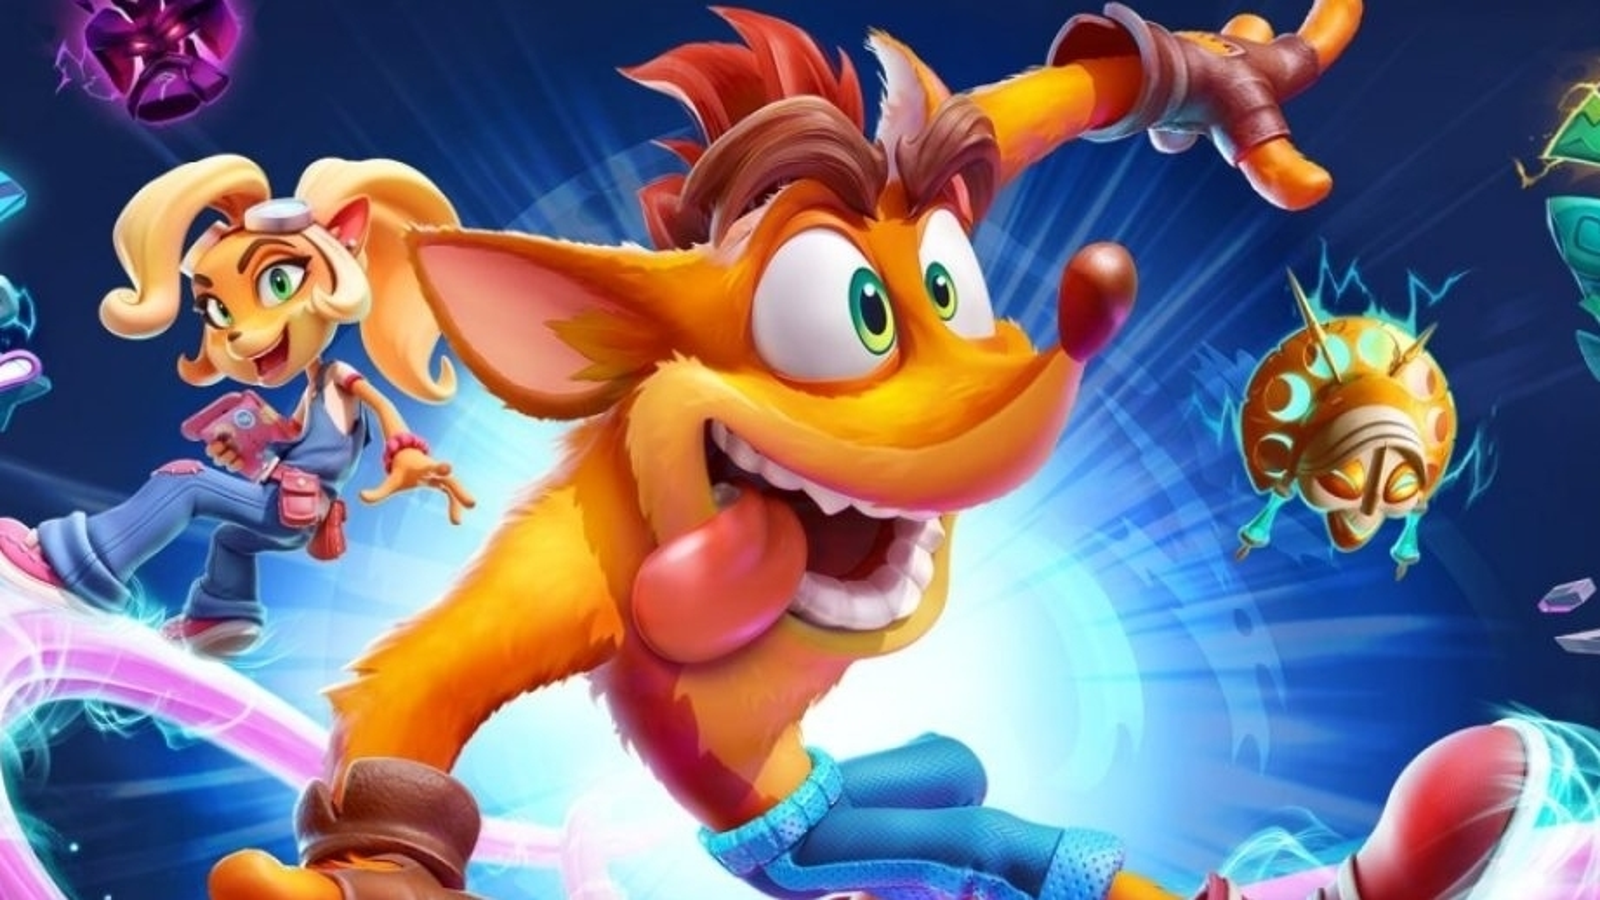 Crash Bandicoot 4 Reportedly Has Over 100 Levels